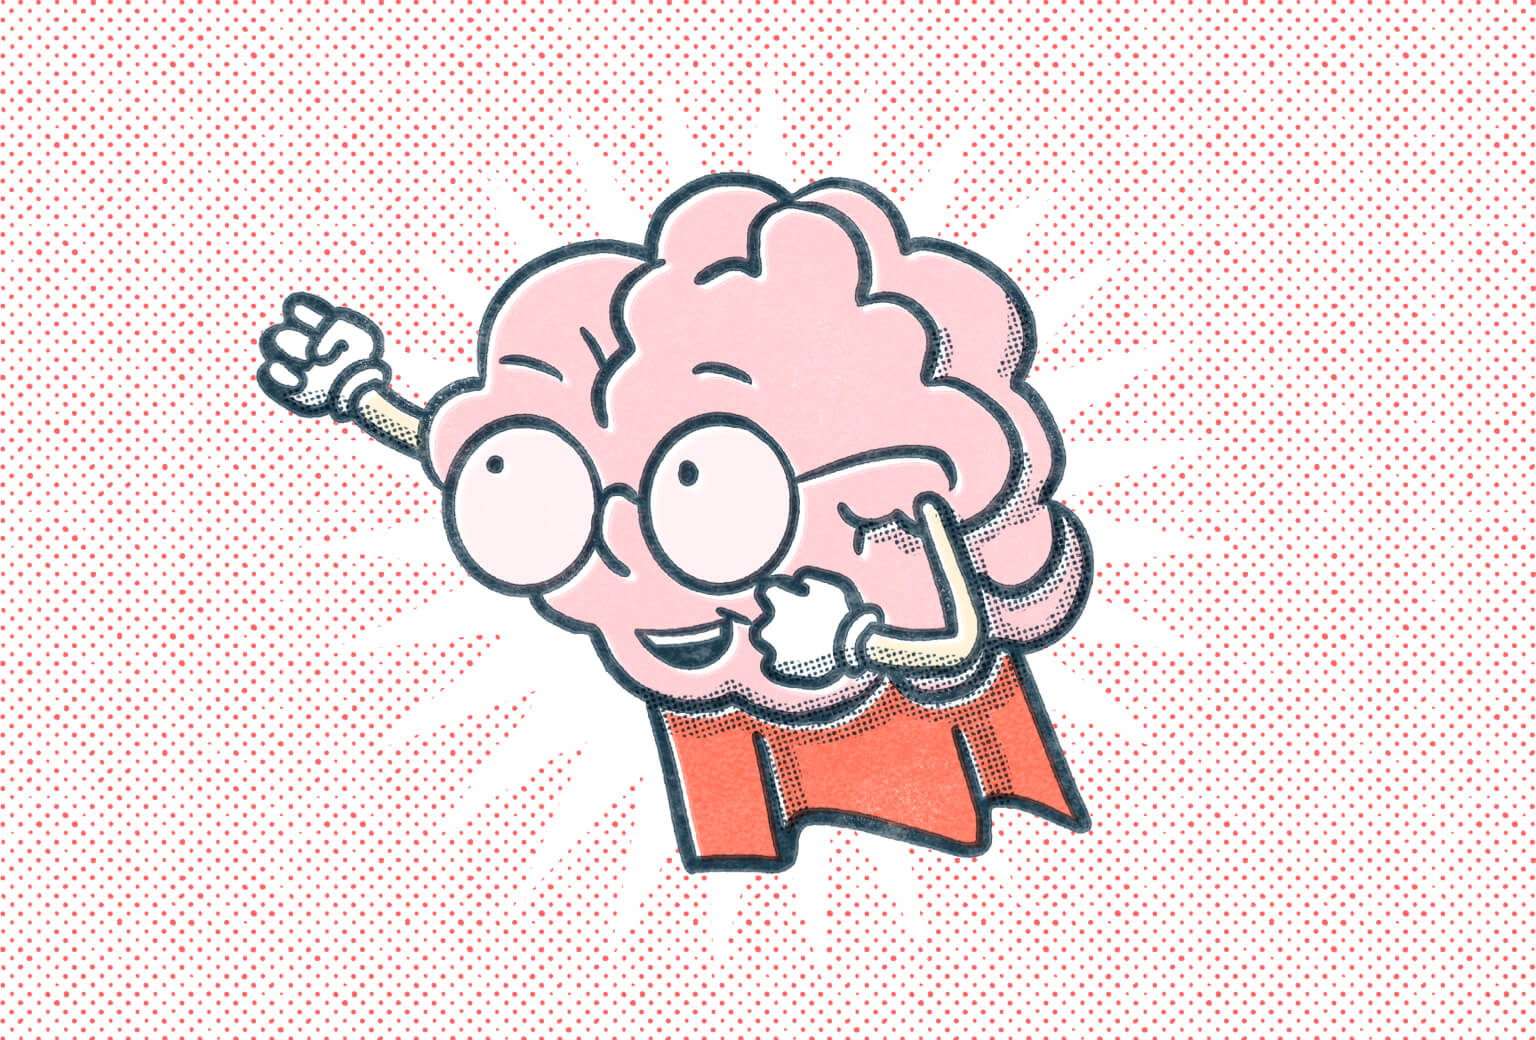 An illustrated brain character wearing glasses and a cape blasting off like Superman on a dotted red background.